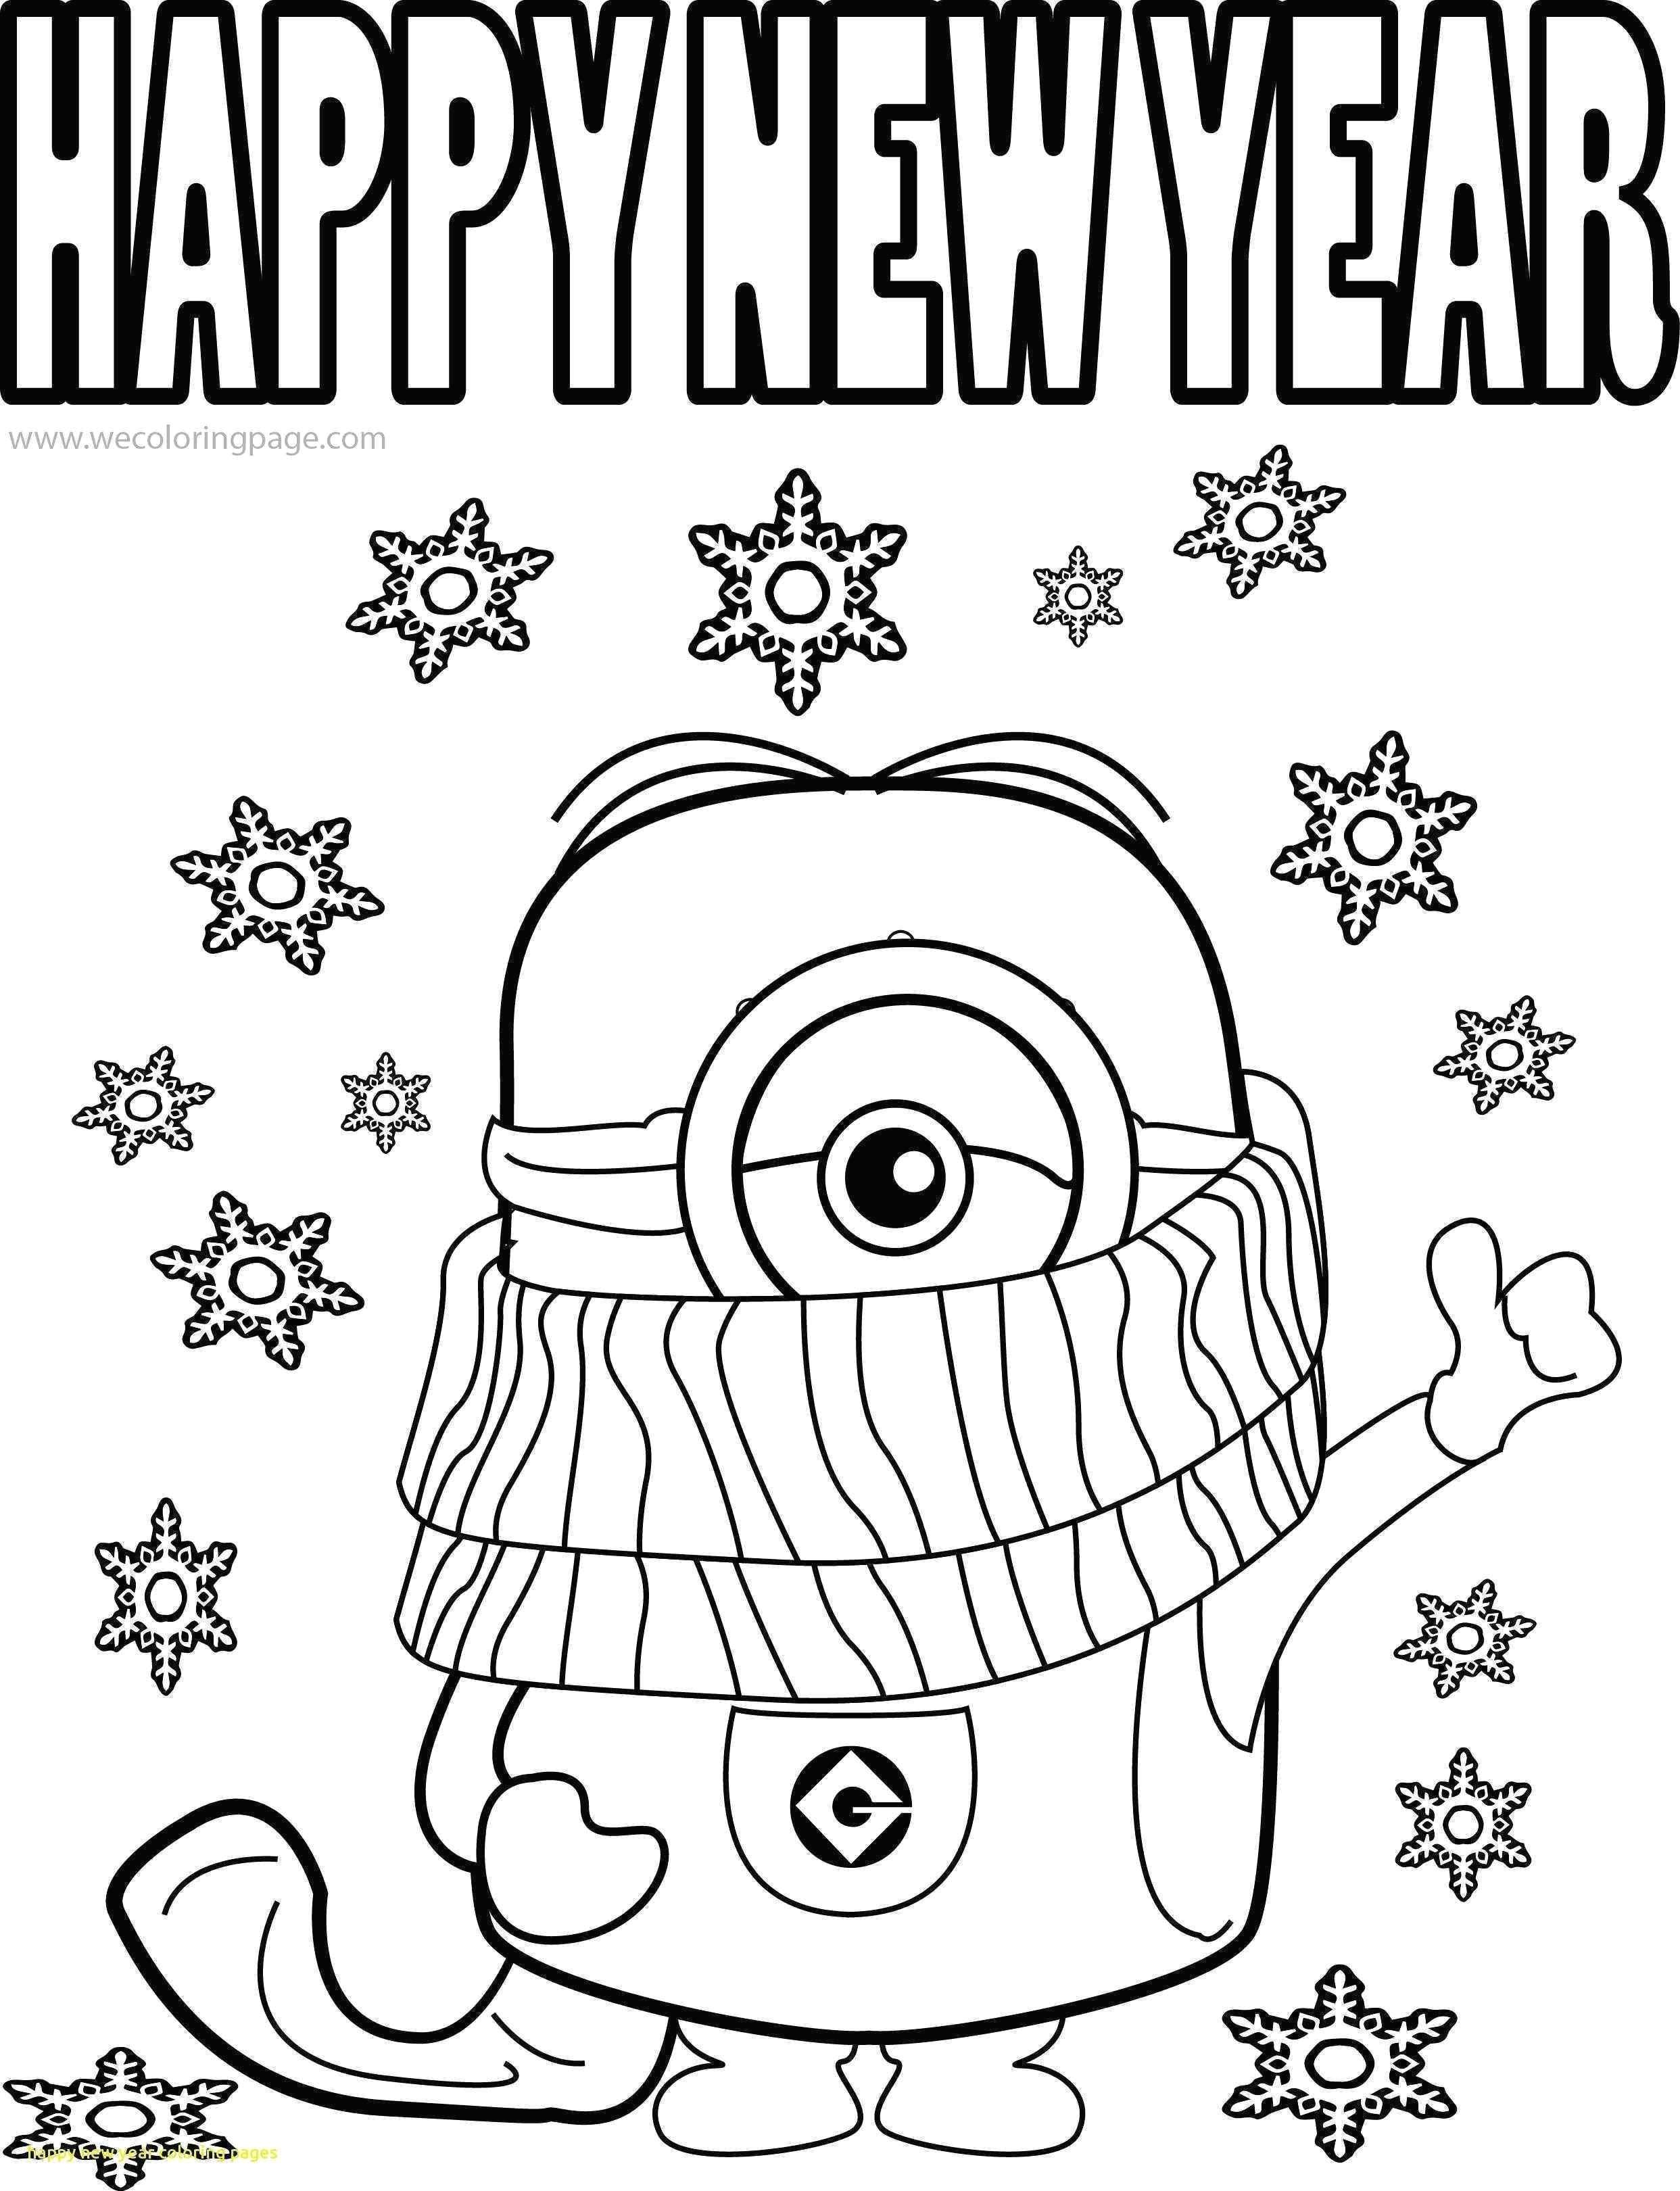 Xmas Drawing Ideas Inspirational Merry Christmas Coloring Pages that Say Merry